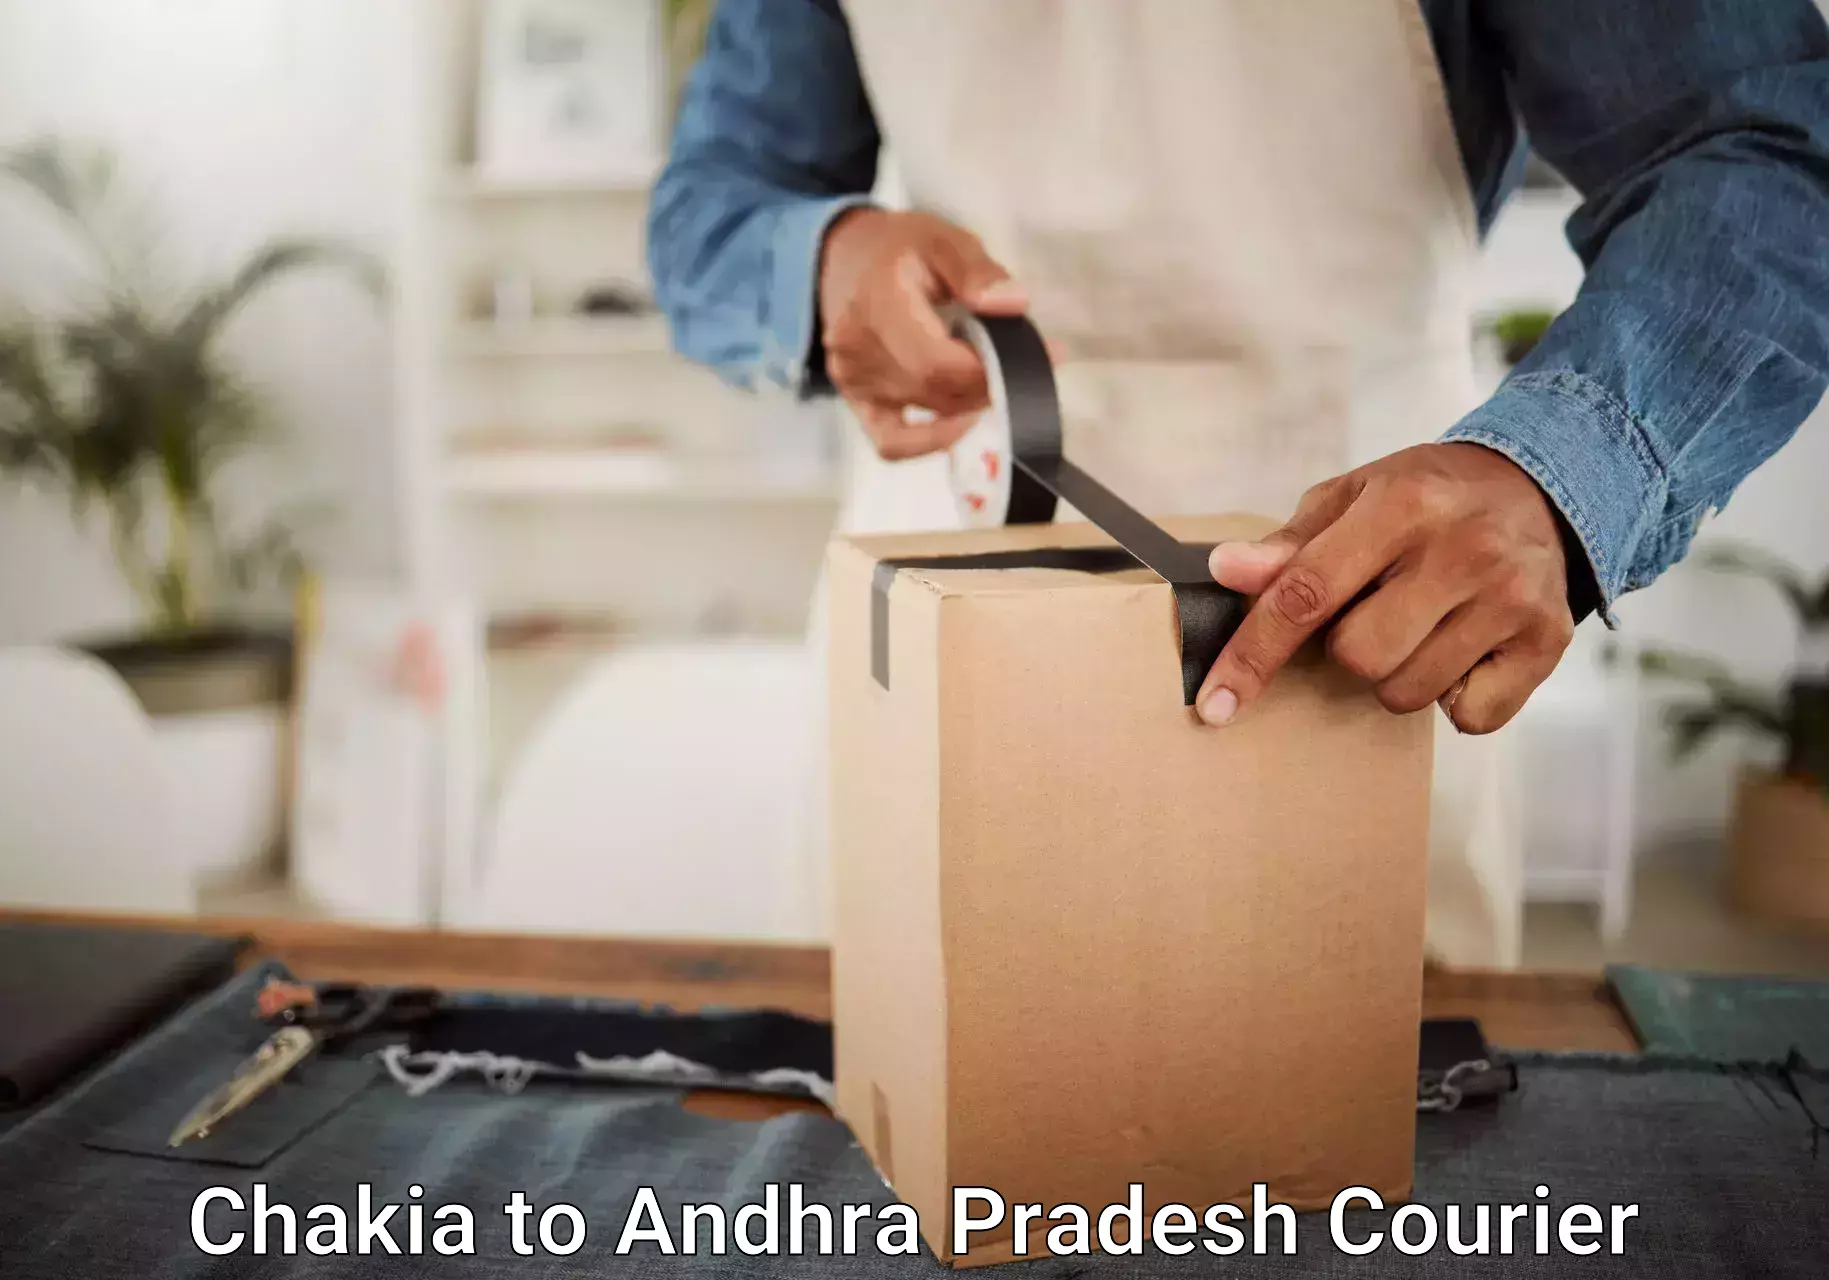 Luggage delivery system Chakia to Andhra Pradesh